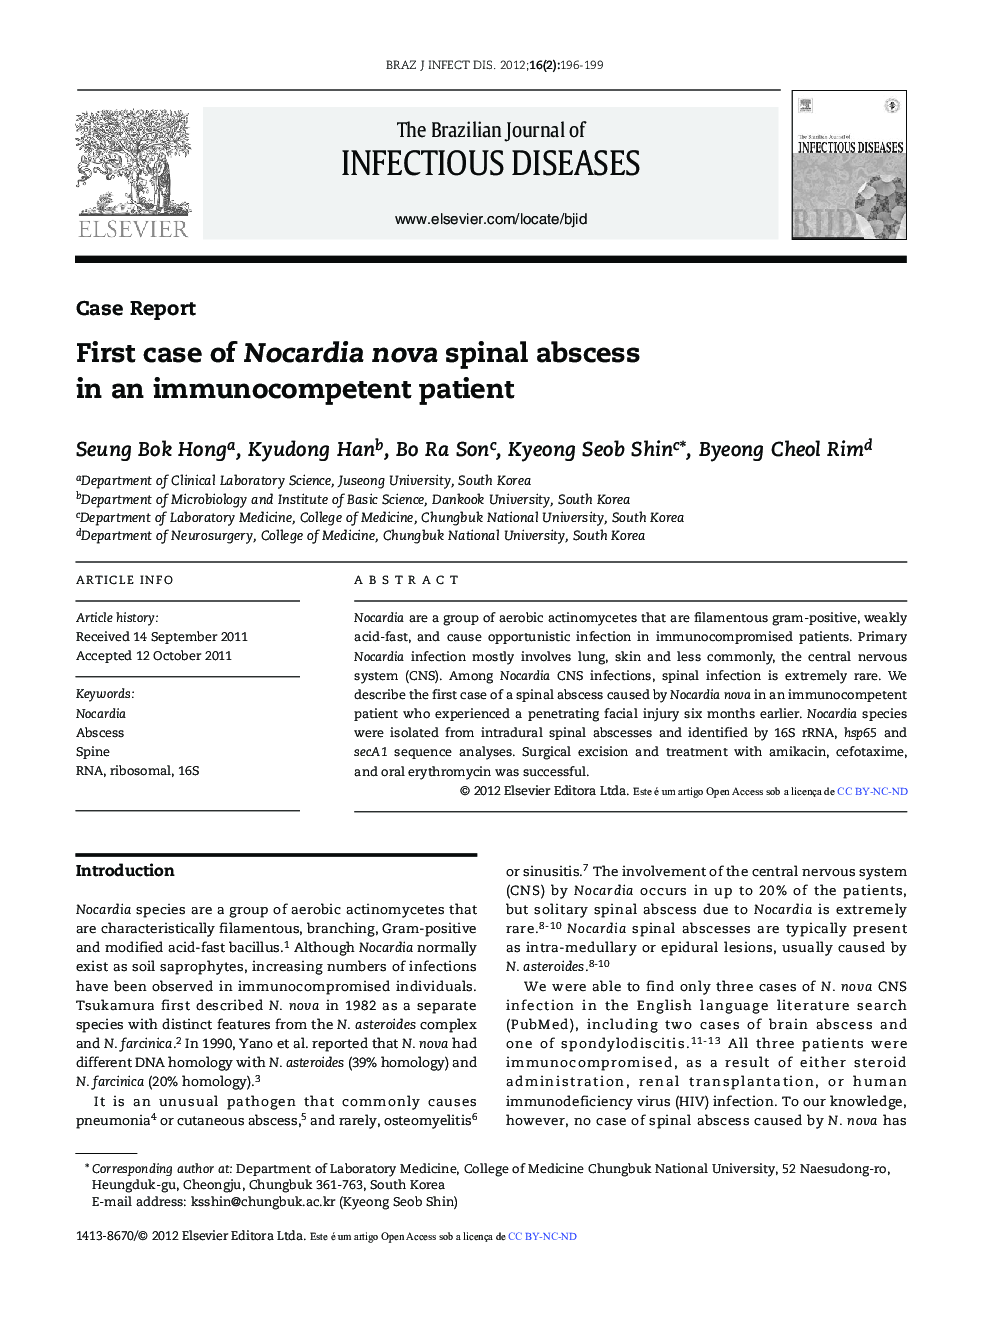 First case of Nocardia nova spinal abscess in an immunocompetent patient